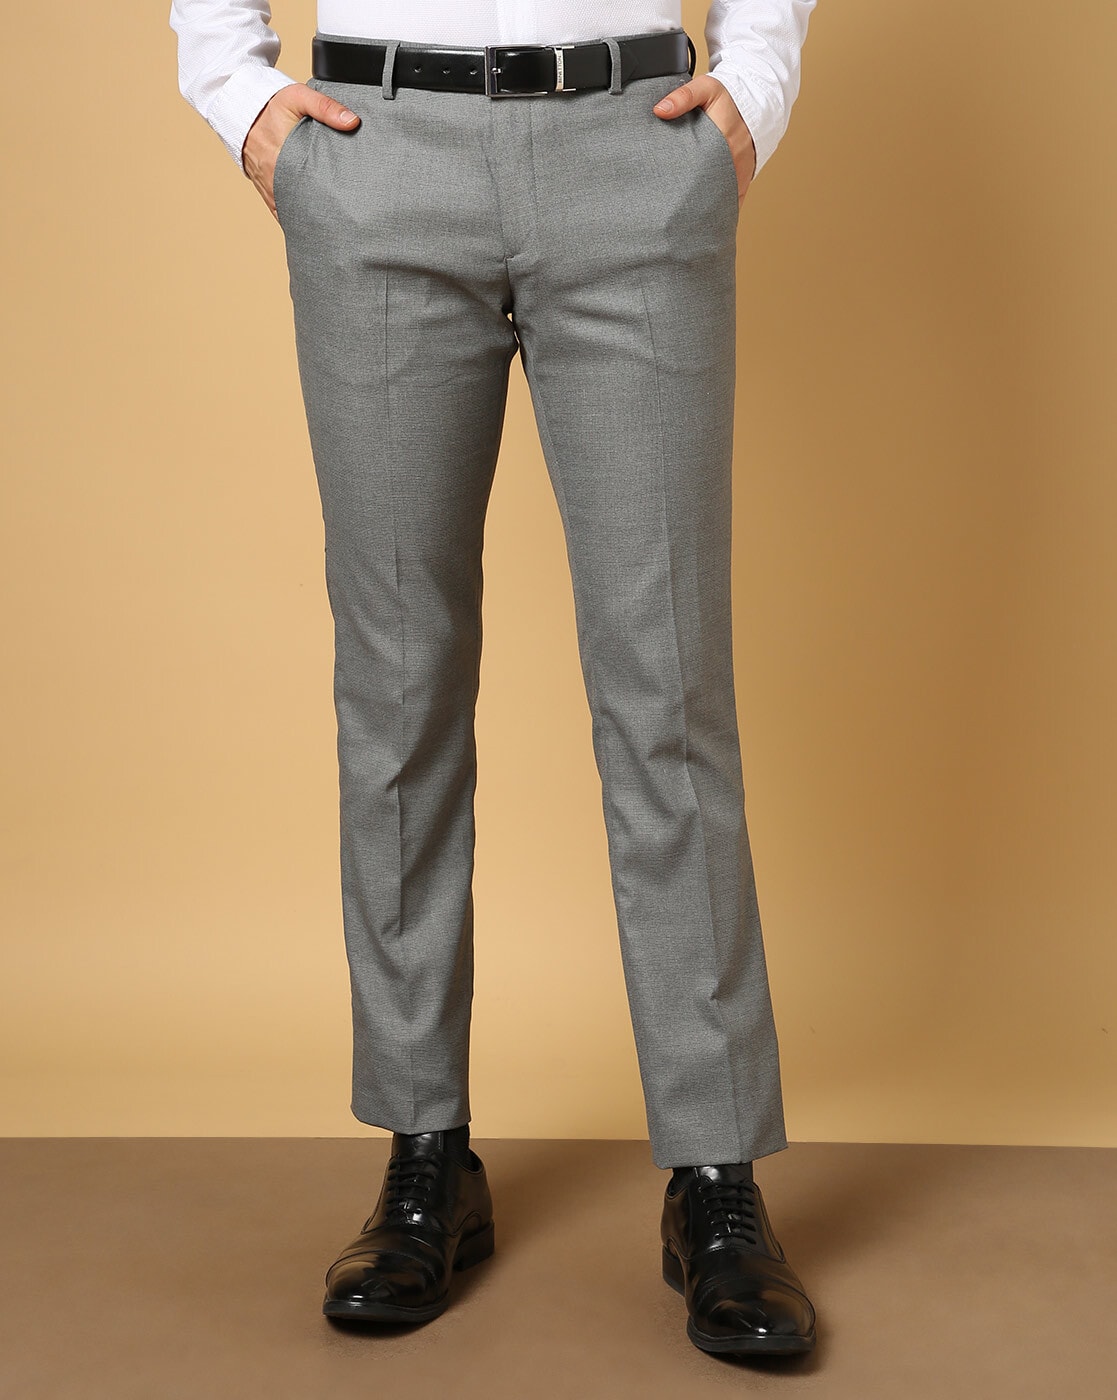 Arrow Tapered Fit Trousers  Buy Arrow Tapered Fit Trousers online in India